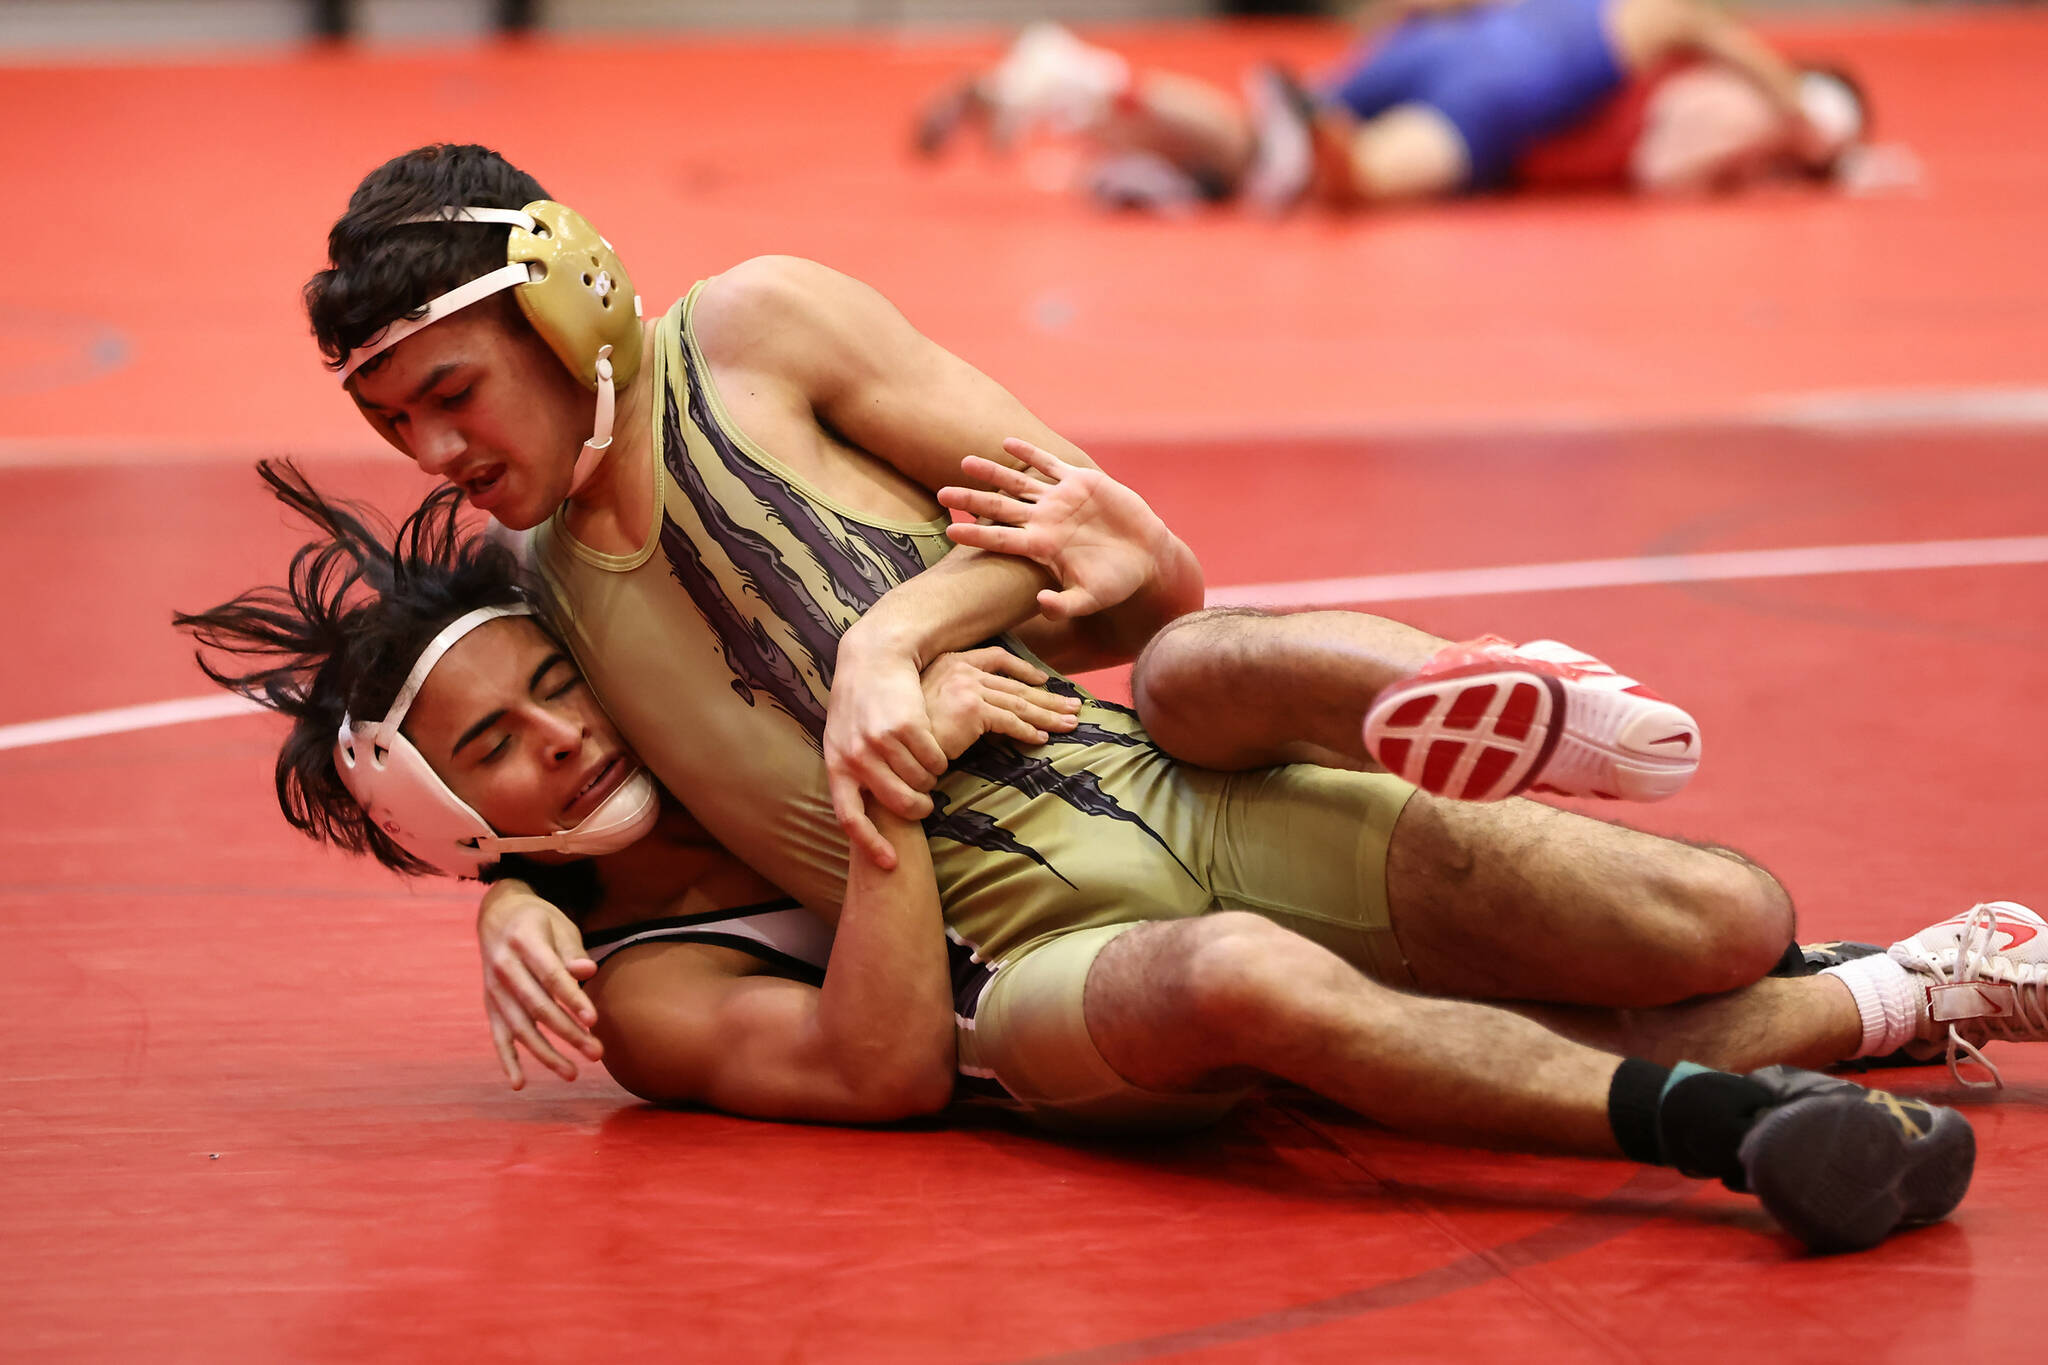 Photos by John Fisken
Junior Brendan Doria upsets the number two seed at the sub-regionals wrestling tournament Feb. 4 in Stanwood.